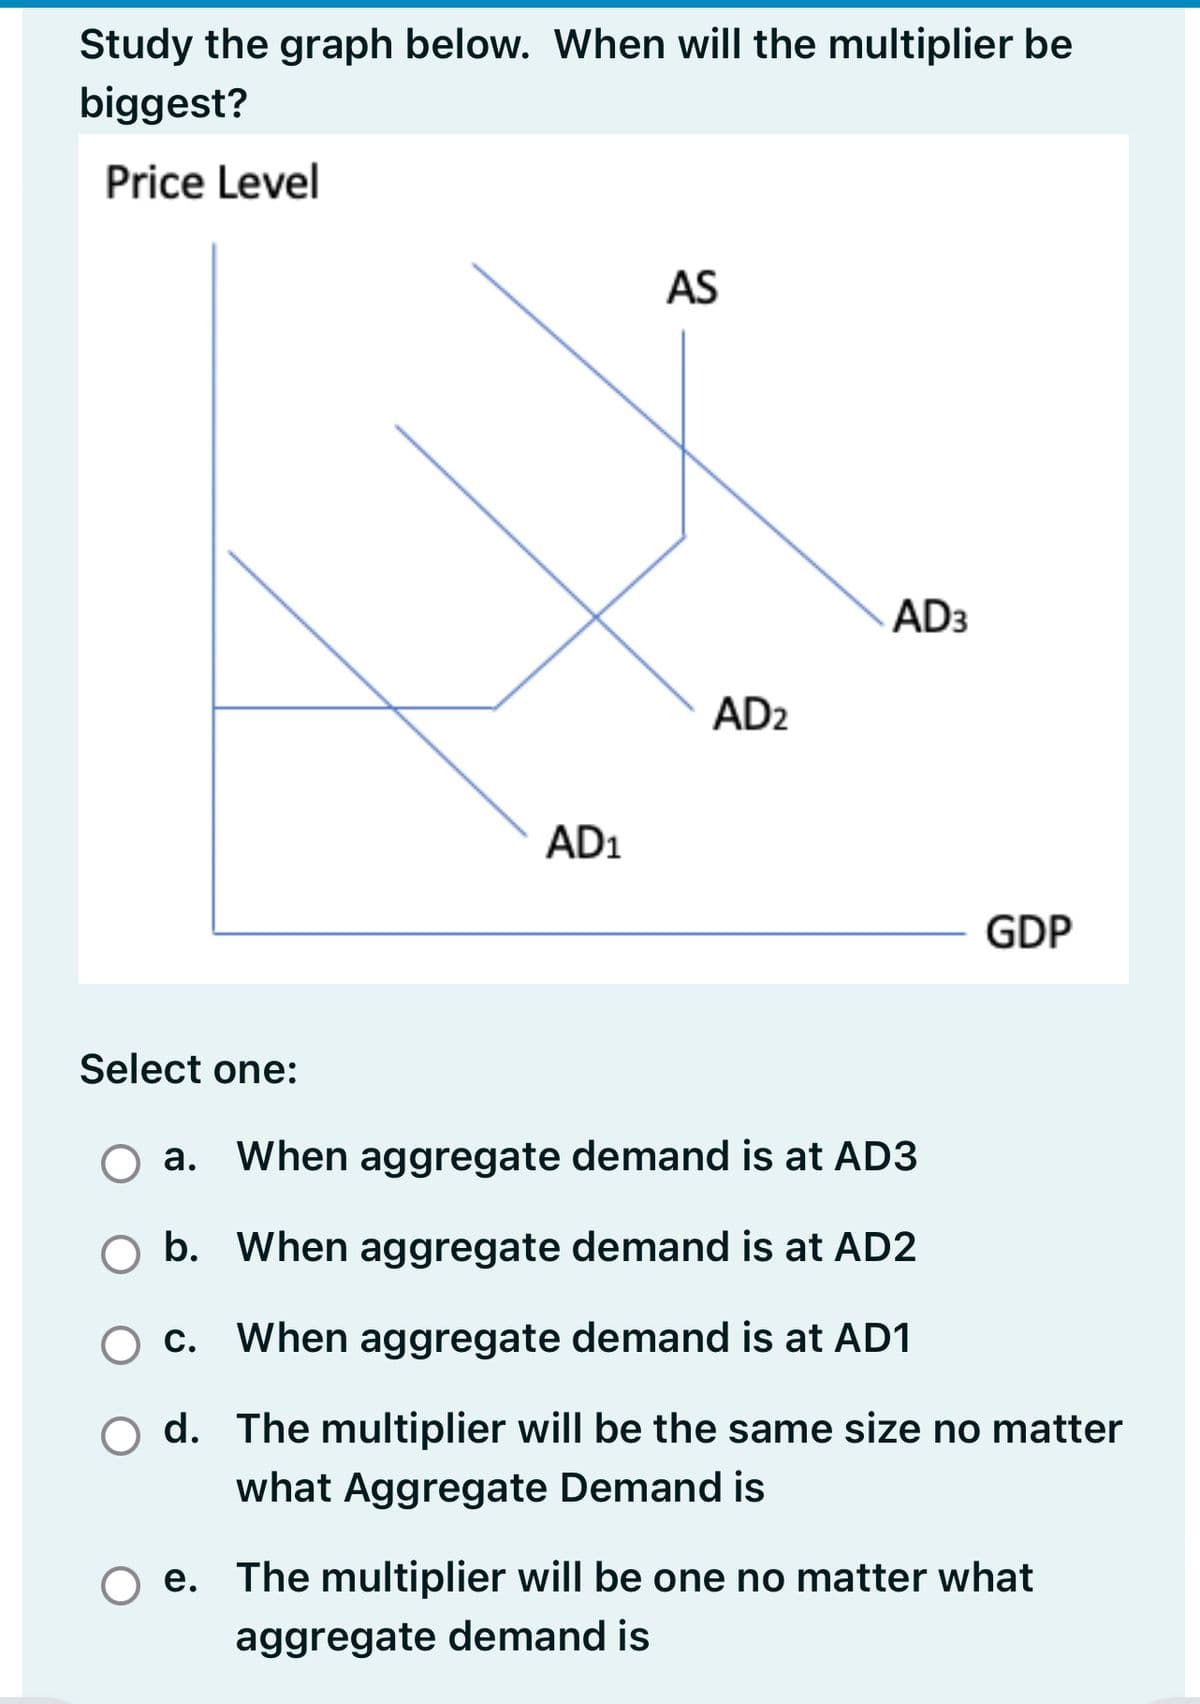 Study the graph below. When will the multiplier be
biggest?
Price Level
AD1
AS
AD3
AD2
GDP
Select one:
a. When aggregate demand is at AD3
b. When aggregate demand is at AD2
c. When aggregate demand is at AD1
d. The multiplier will be the same size no matter
what Aggregate Demand is
○ e. The multiplier will be one no matter what
aggregate demand is